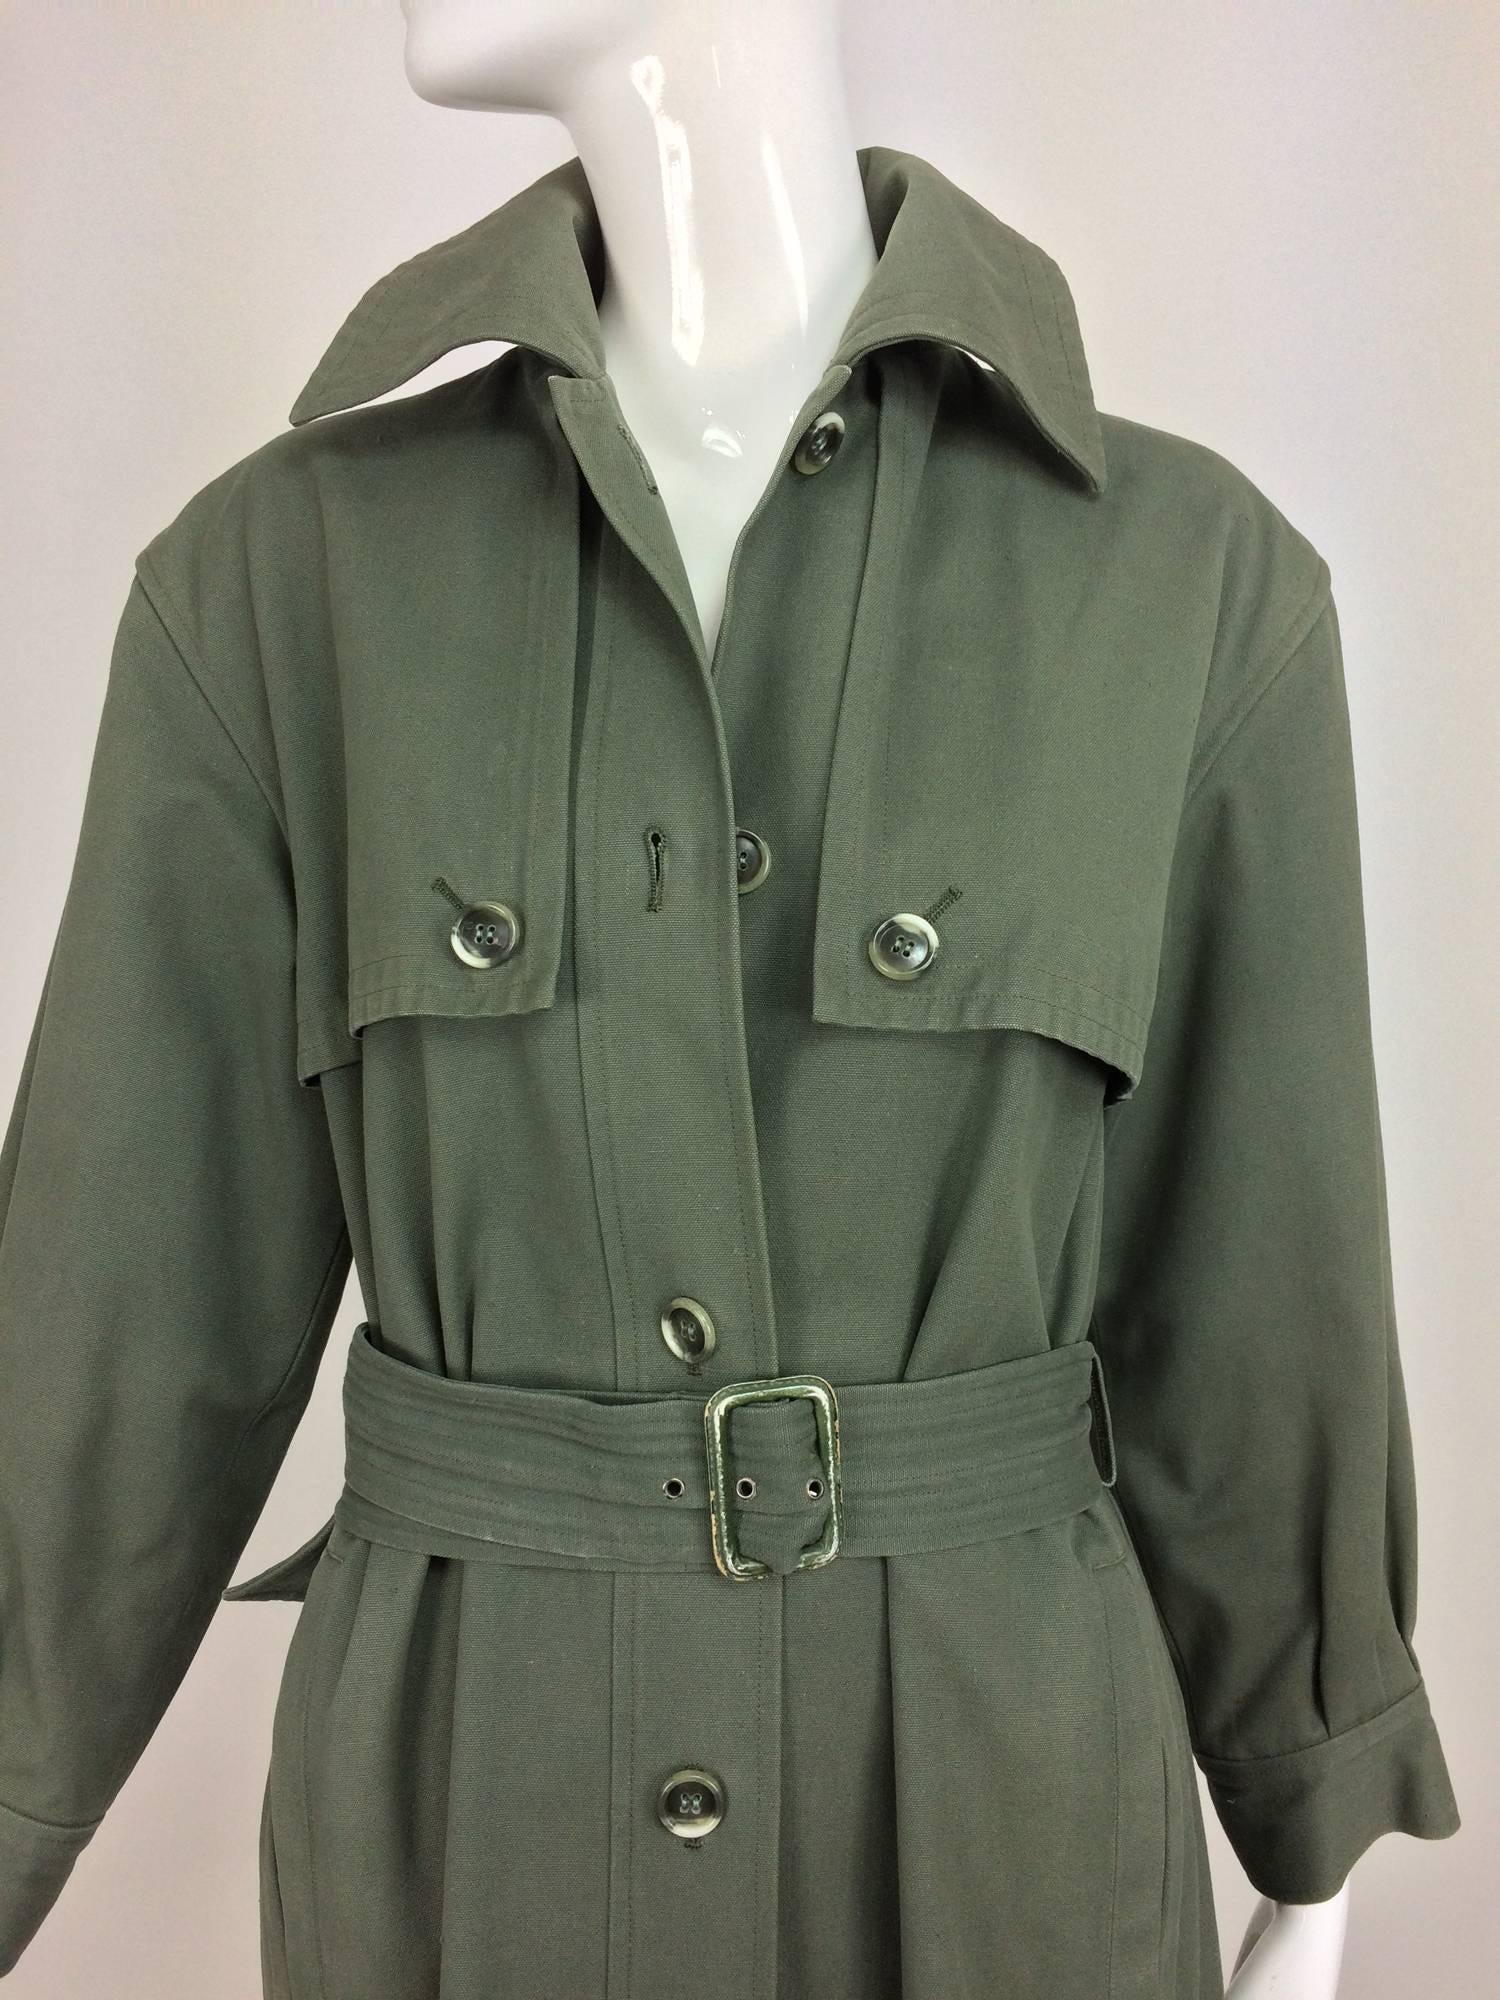 Vintage rare Yves St Laurent military green canvas trench coat 1970s...Military green canvas trench coat is a rare find from the 1970s...Single breasted coat has button front storm flap and deep back storm flap...Long sleeves are gathered into